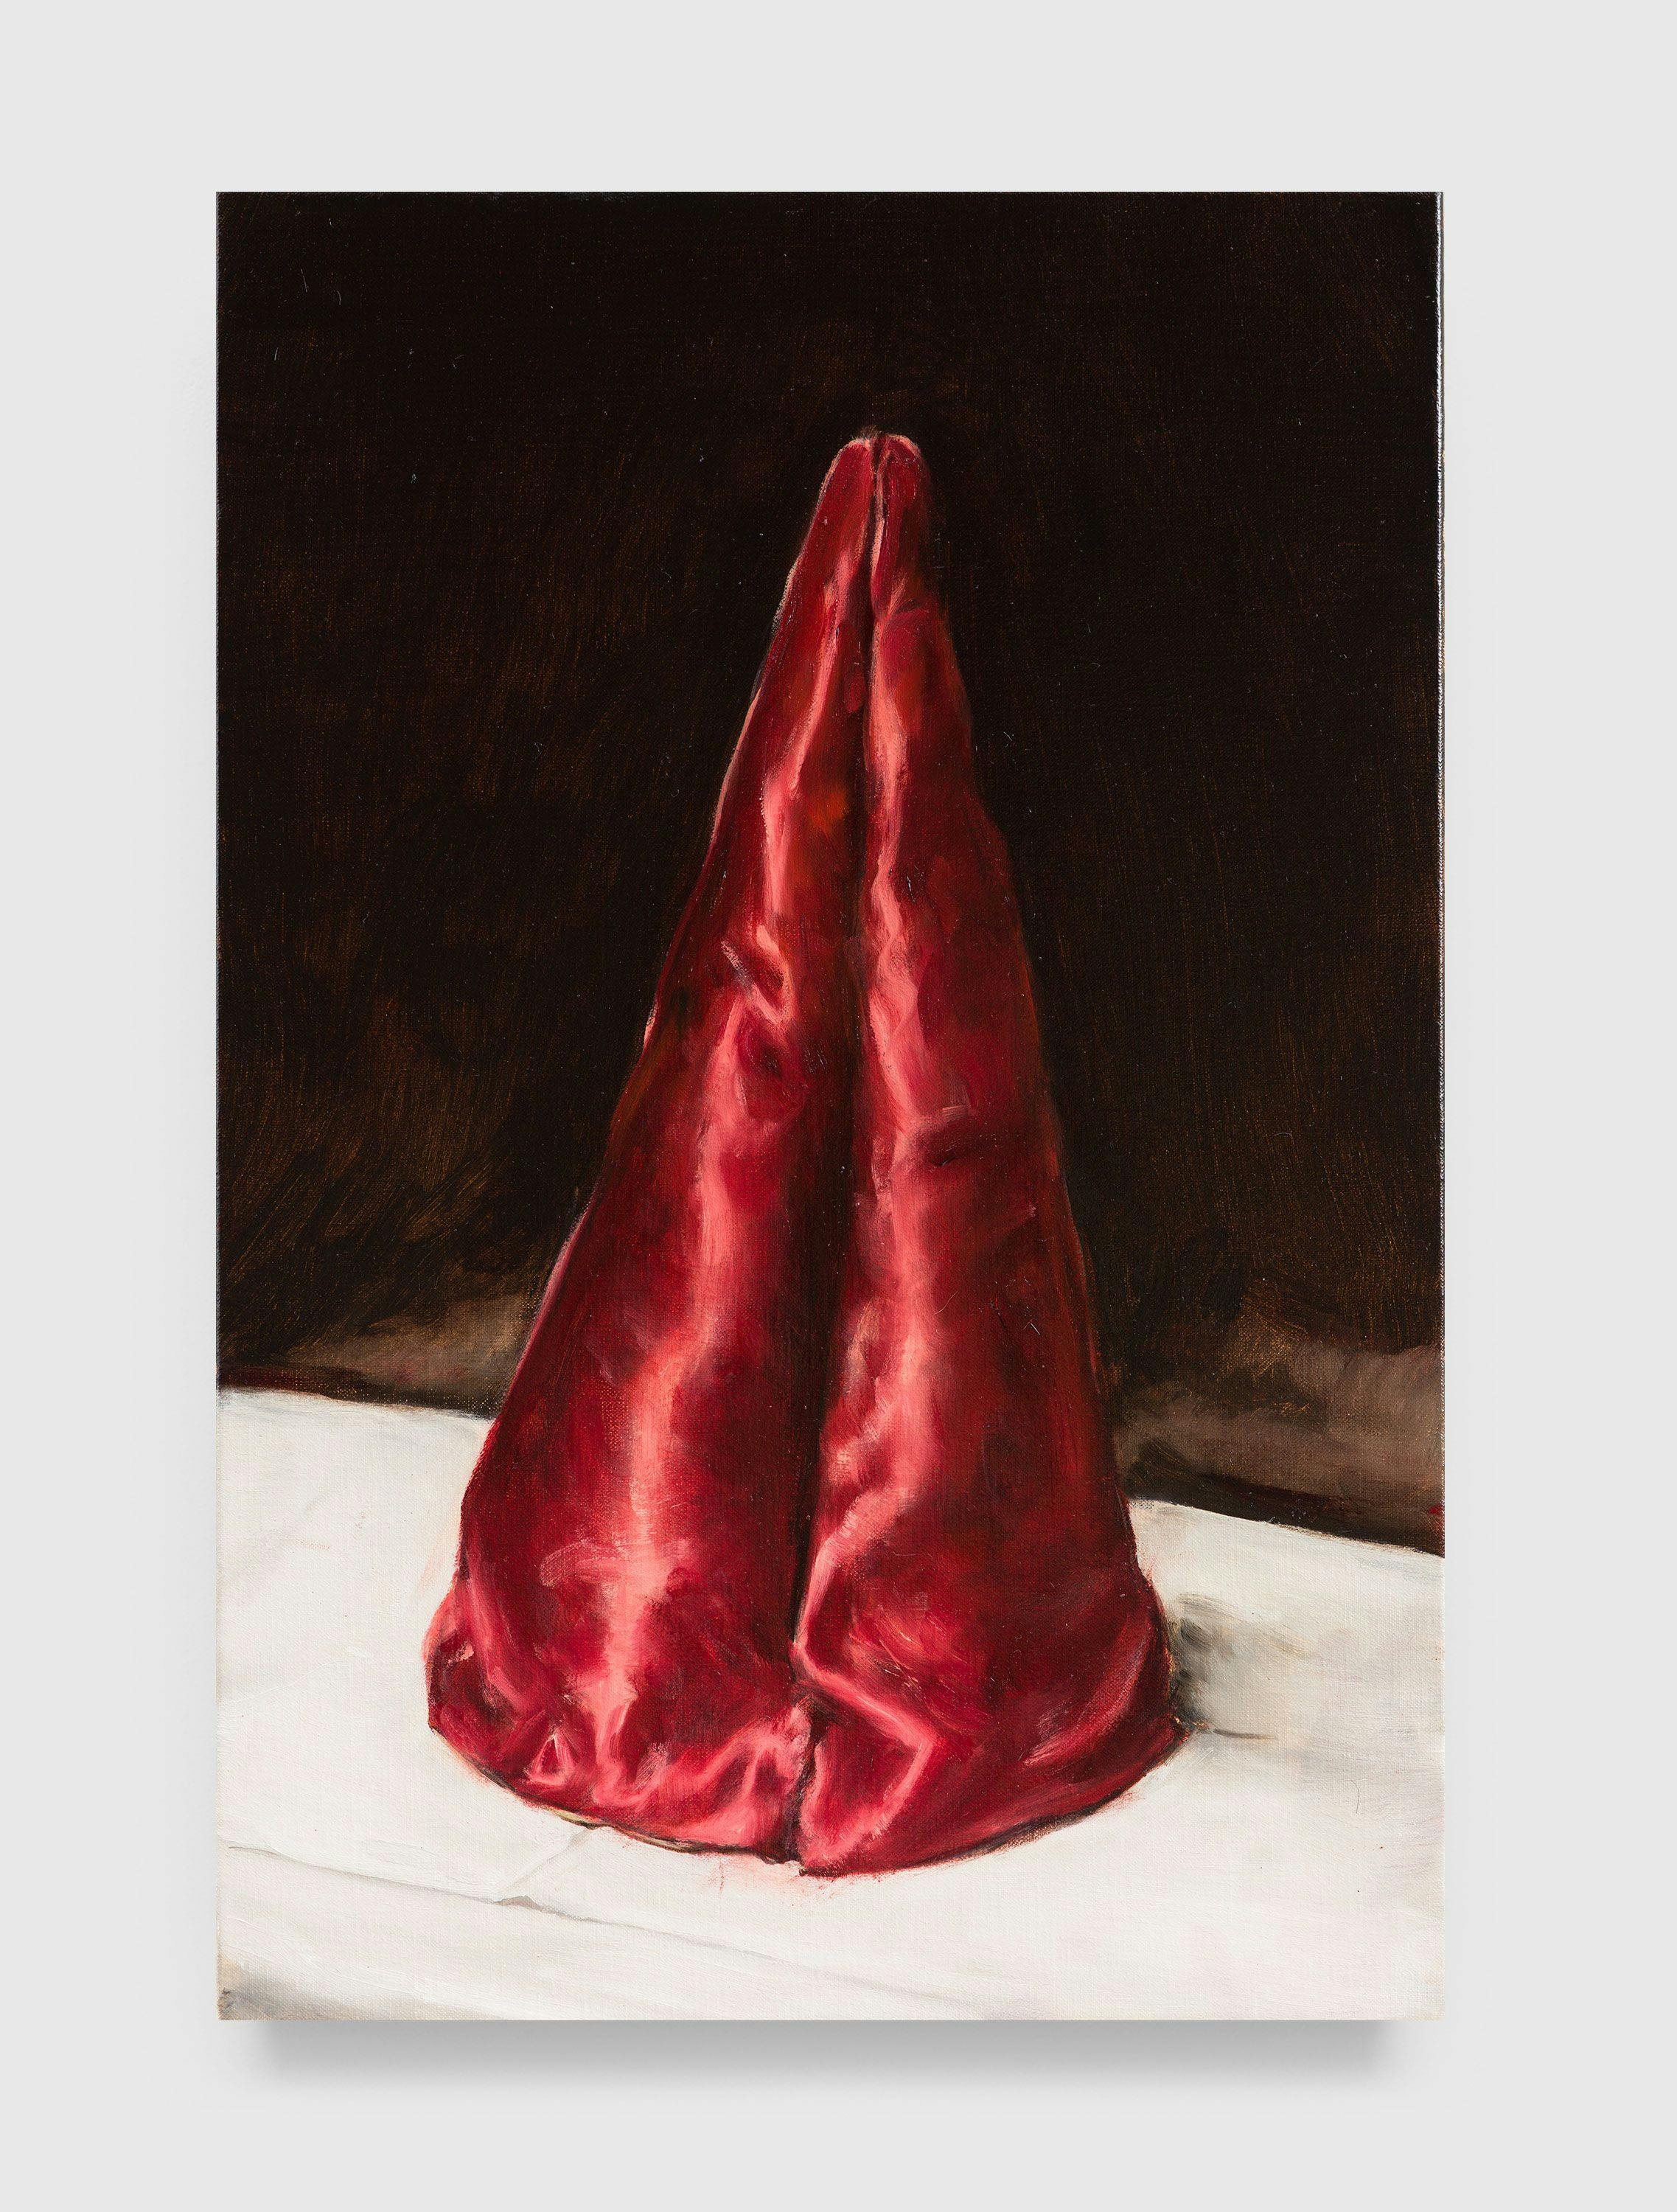 A painting by Michaël Borremans, titled The Pope, dated 2020.